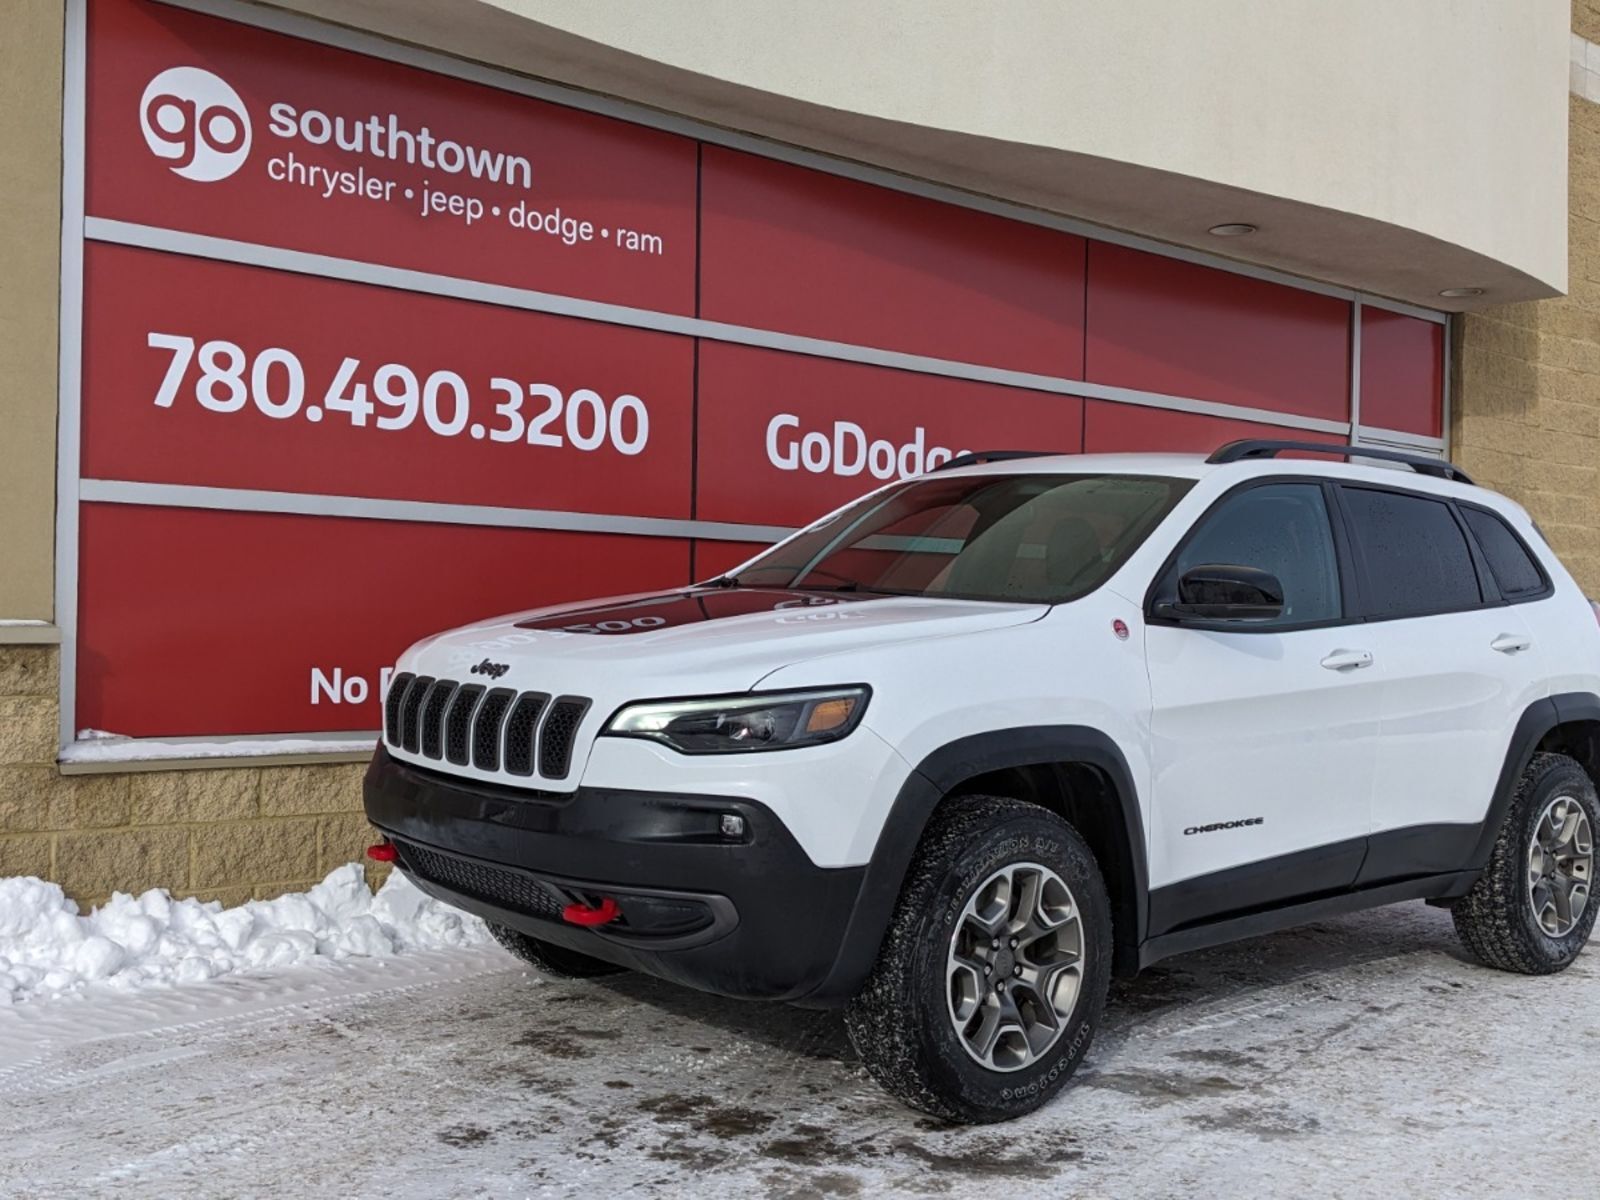 2022 Jeep Cherokee TRAILHAWK IN BRIGHT WHITE EQUIPPED WITH A 3.2L V6 